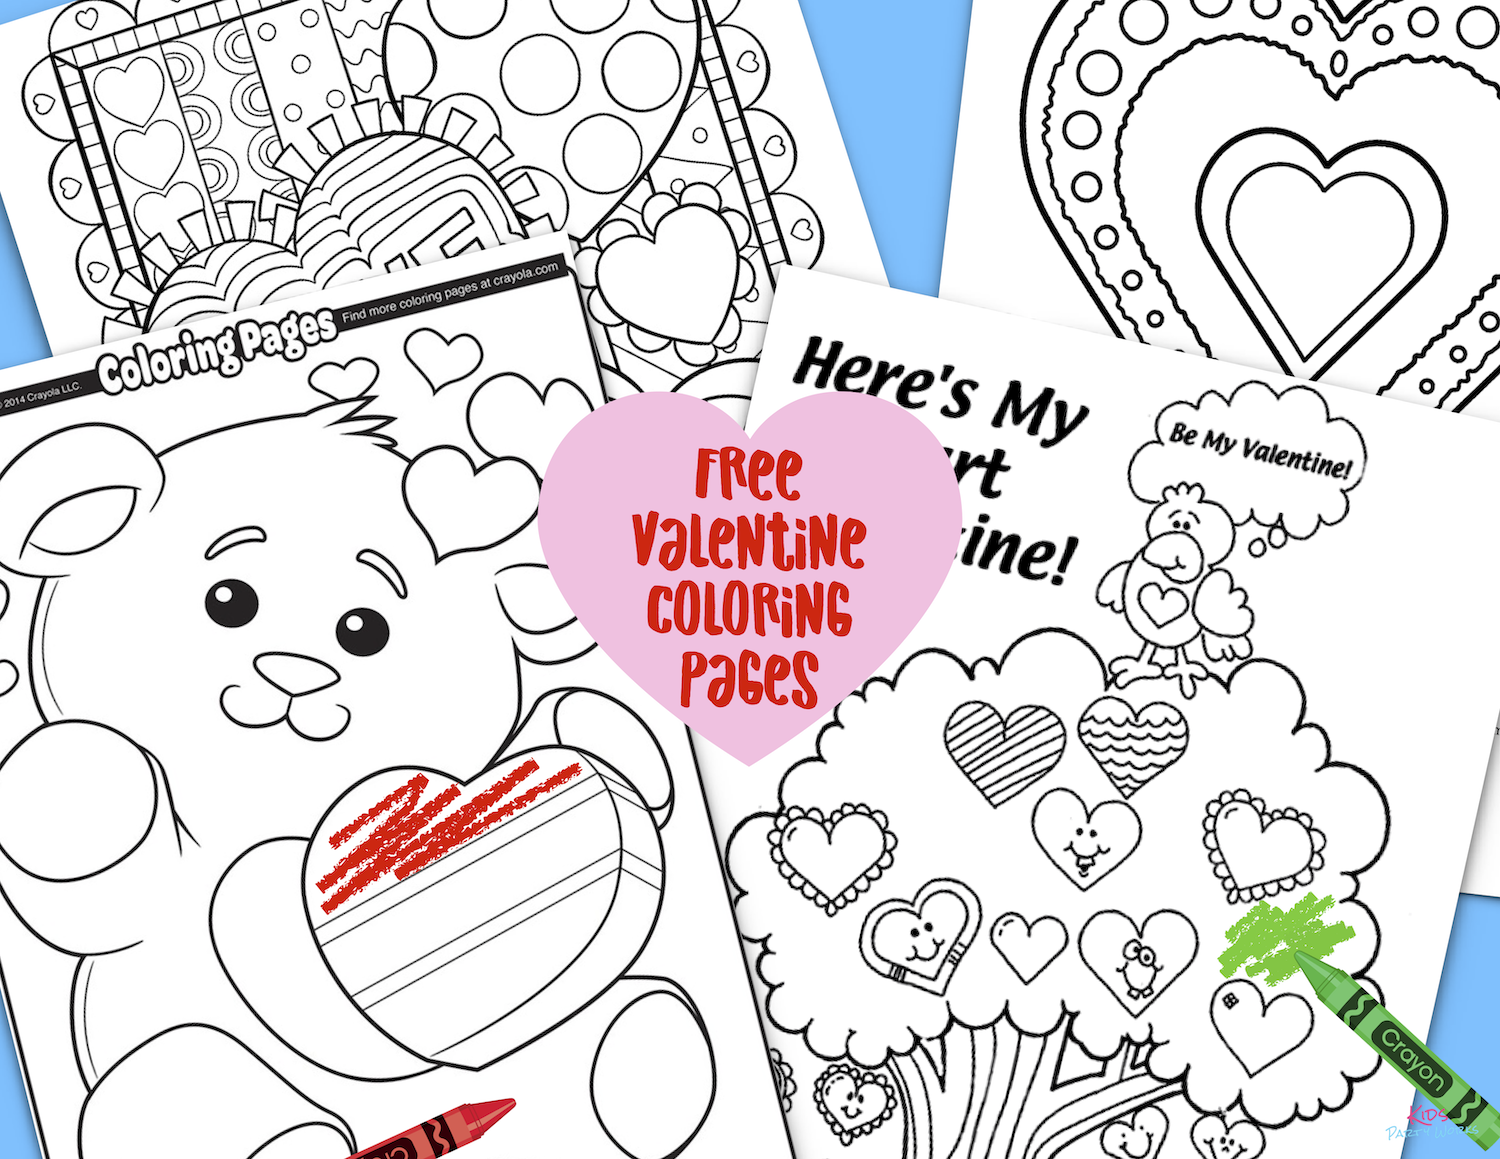 Free Valentine Coloring Pages. Grab all our free Valentine printables at KidsPartyWorks.Com